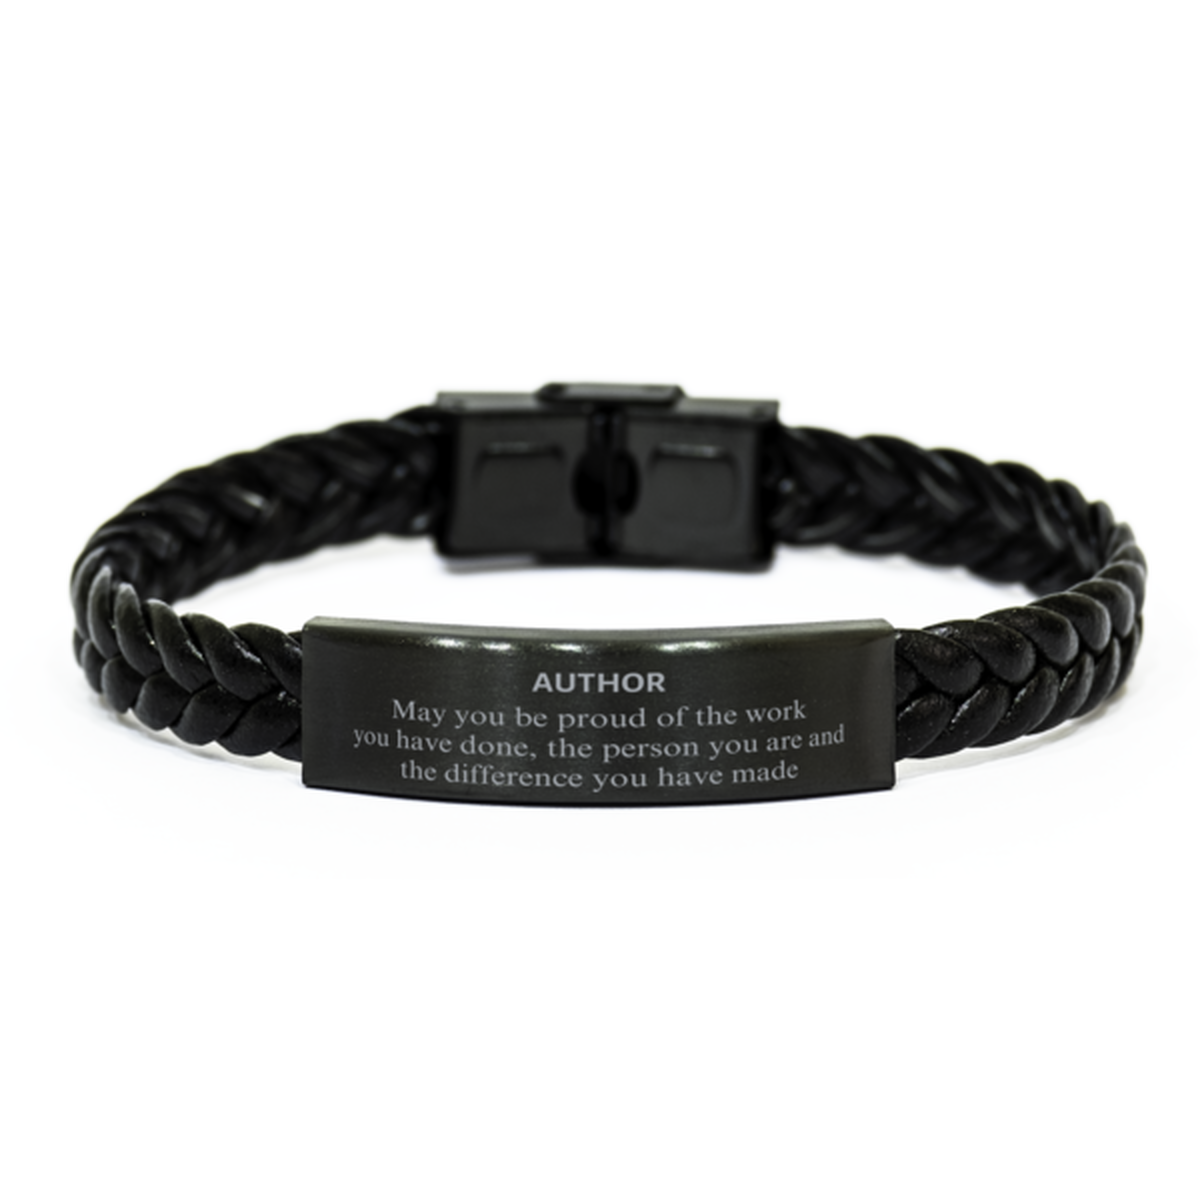 Author May you be proud of the work you have done, Retirement Author Braided Leather Bracelet for Colleague Appreciation Gifts Amazing for Author